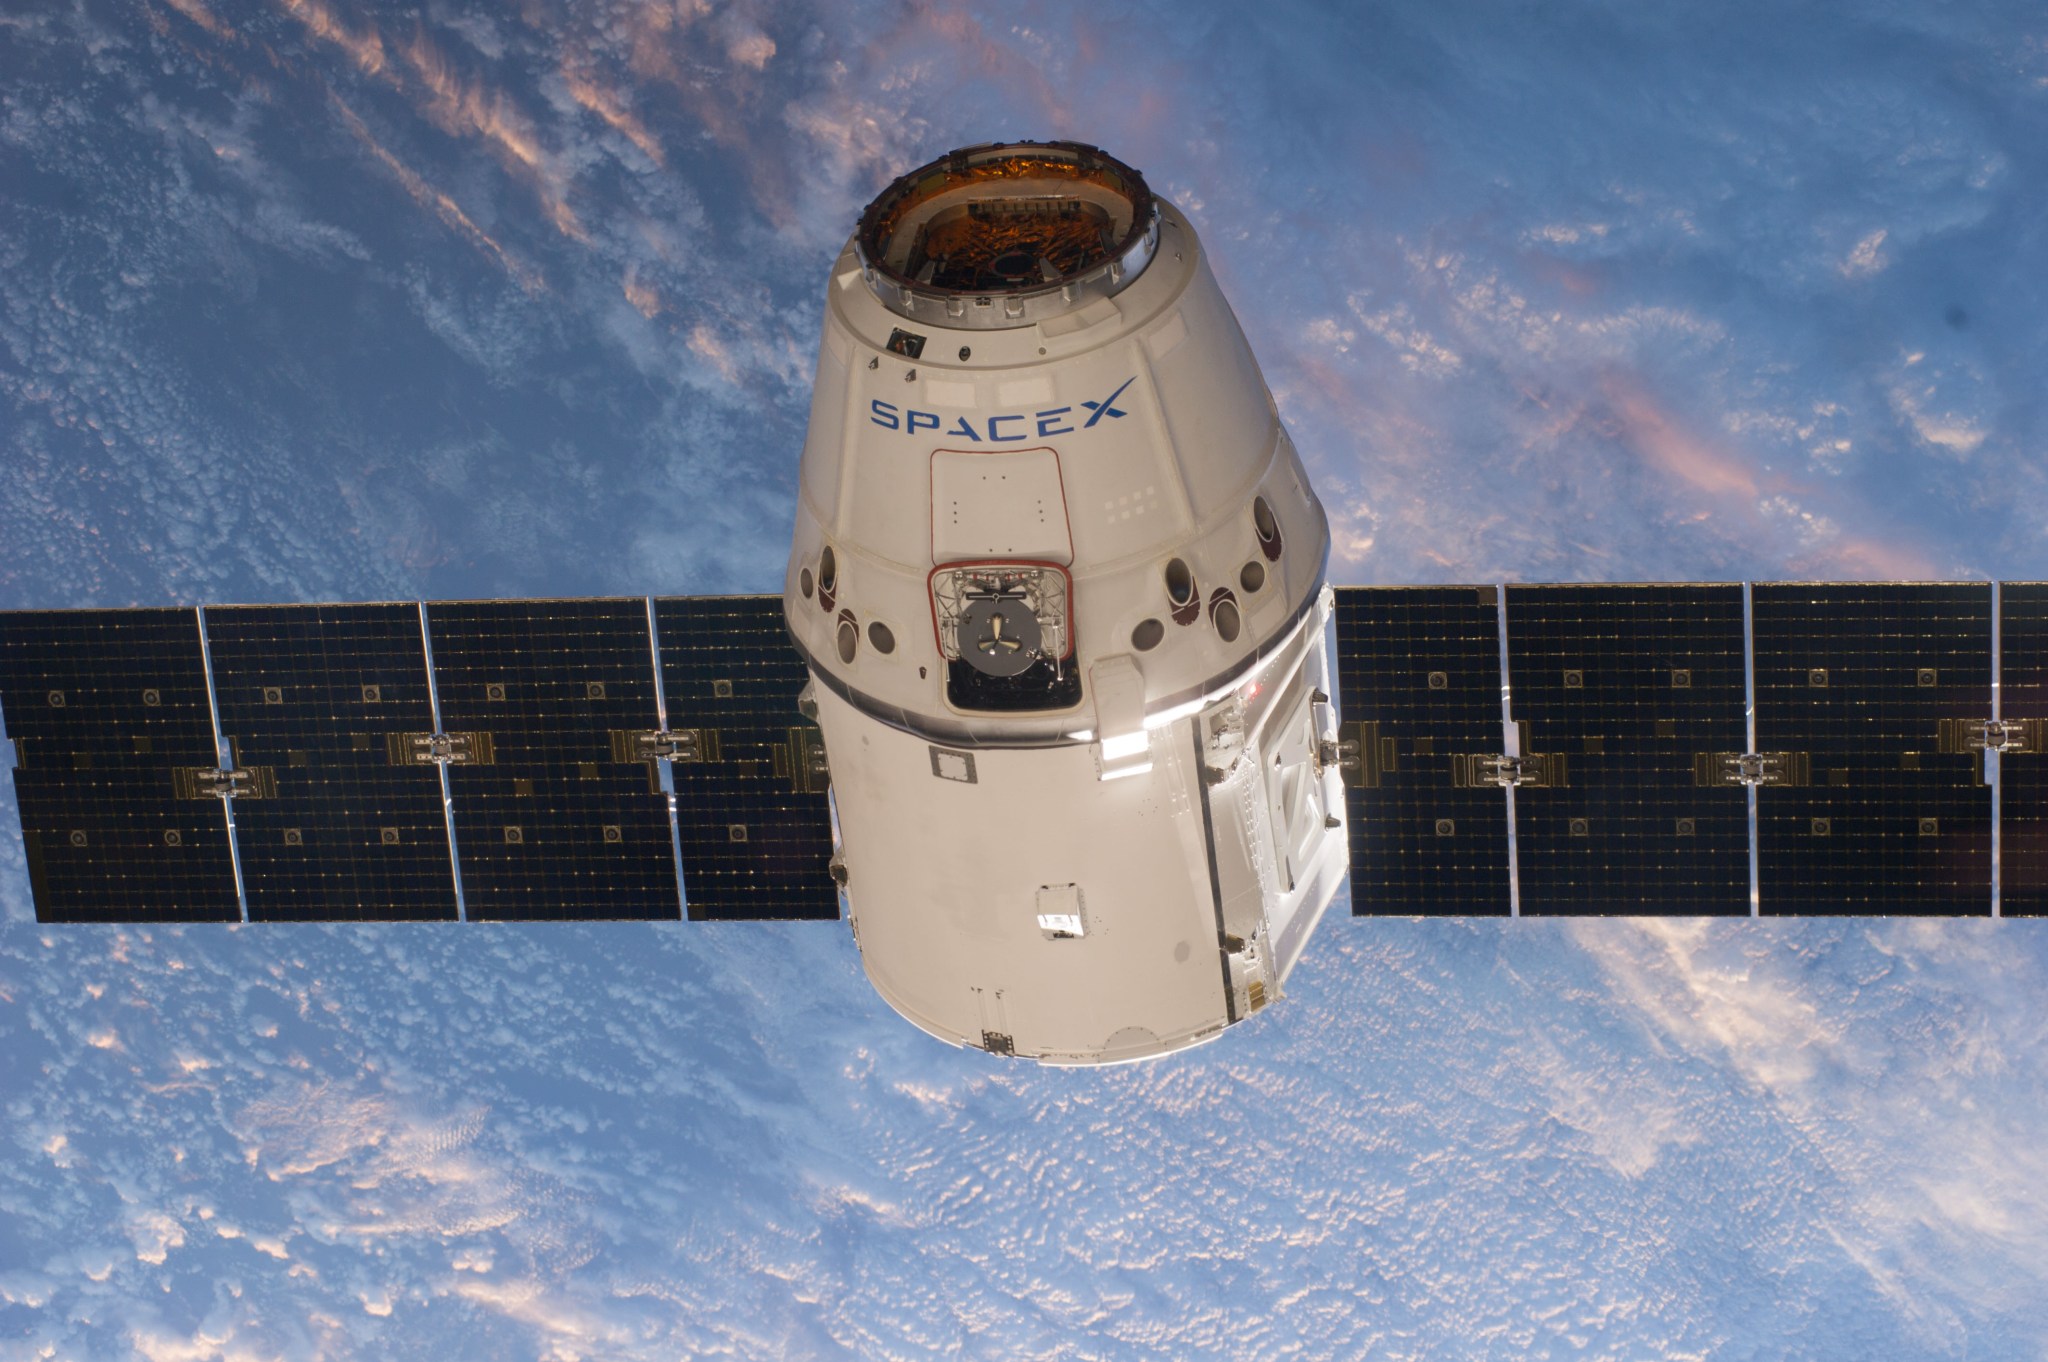 SpaceX Commercial Resupply Services (CRS) Dragon spacecraft in orbit